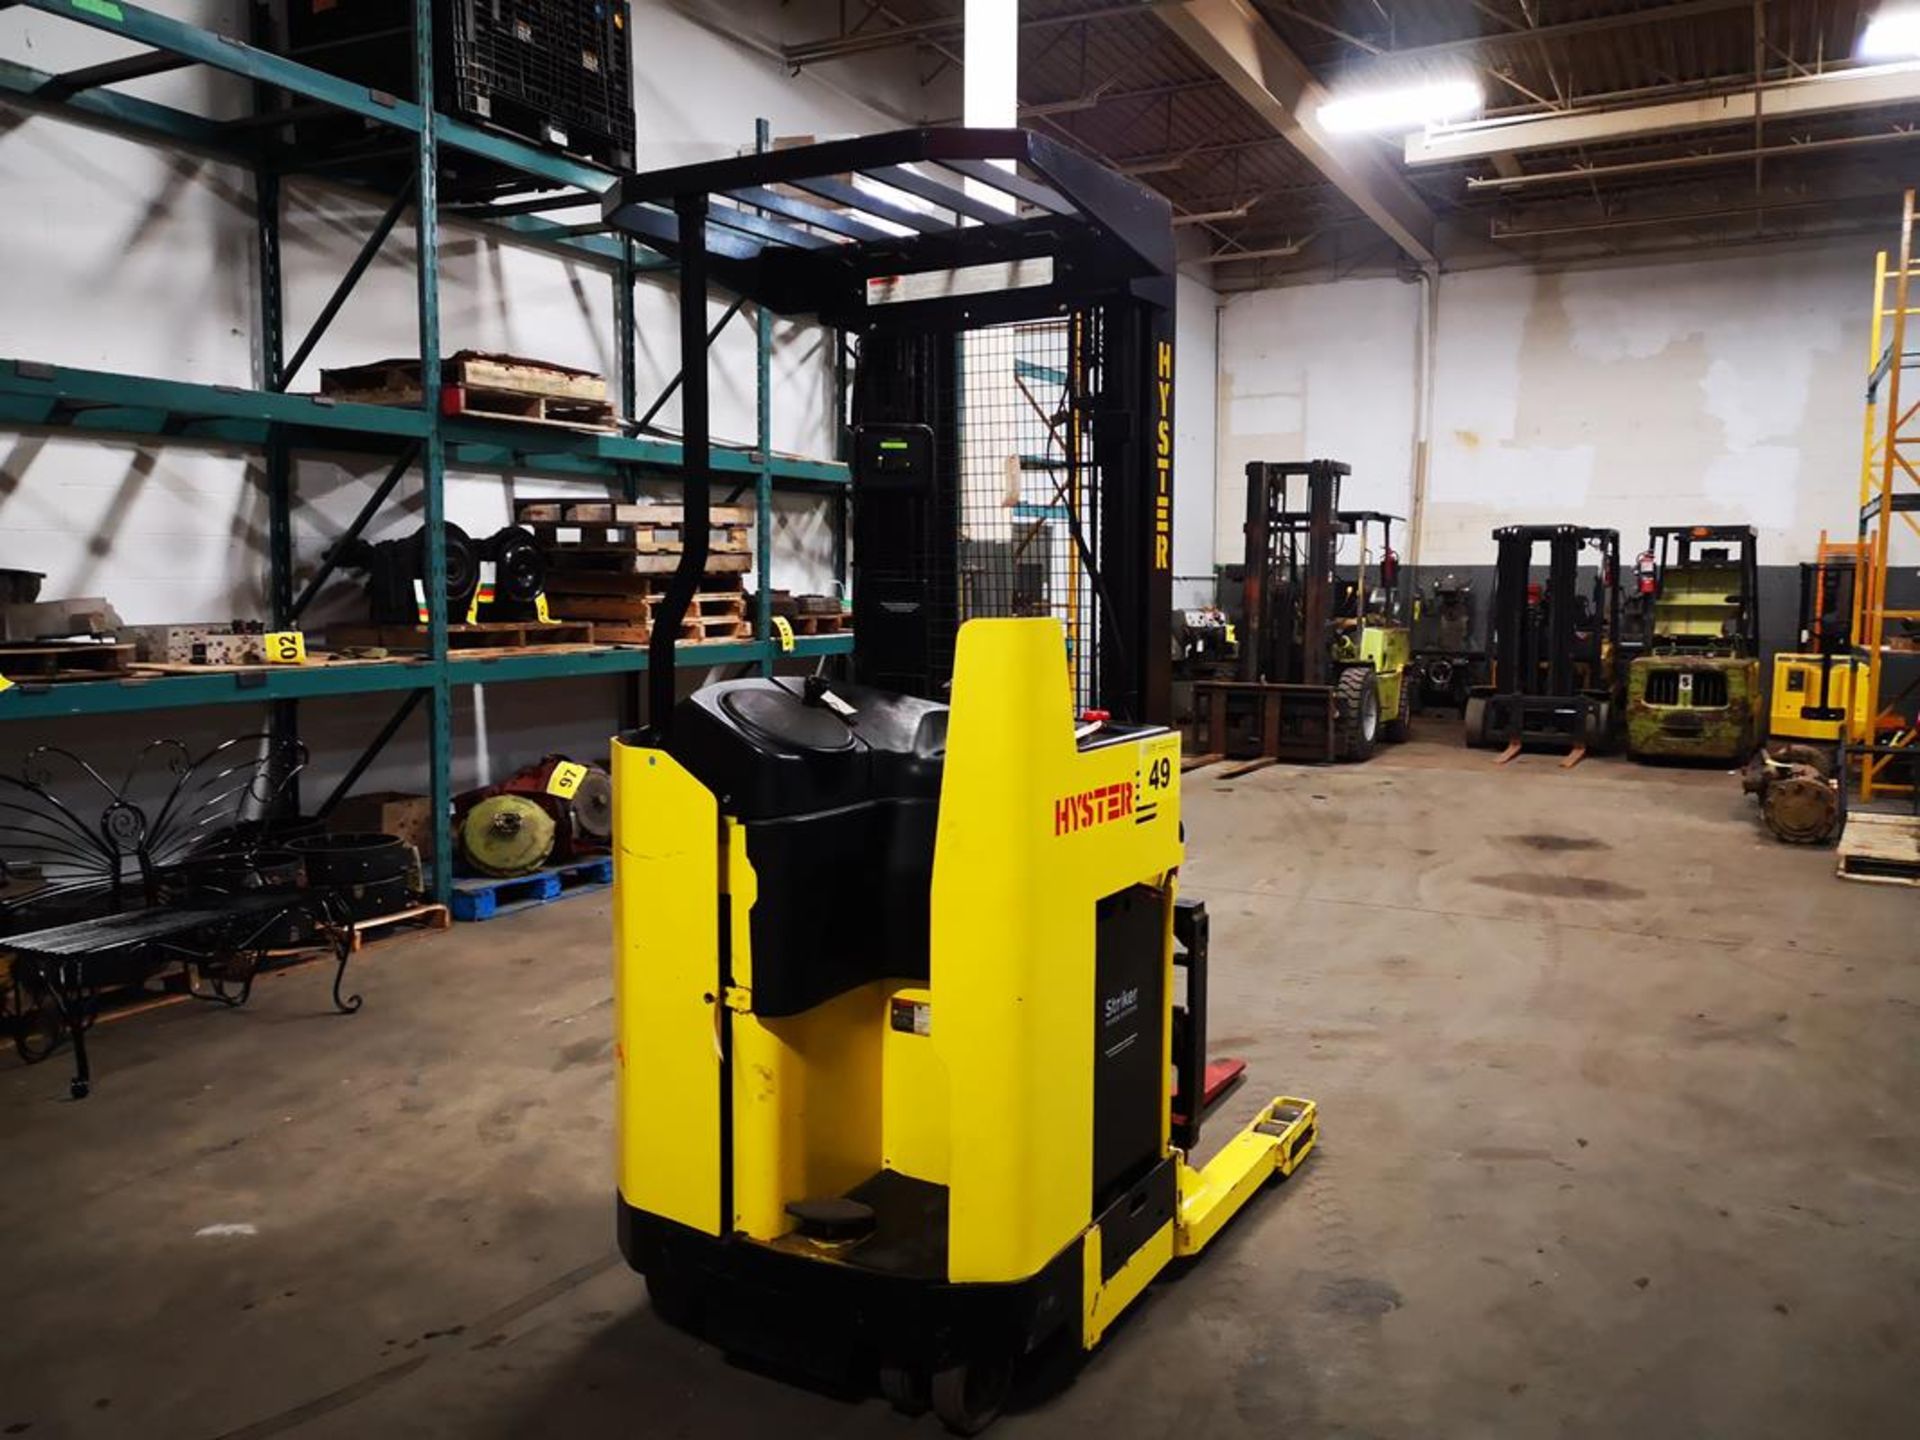 HYSTER, N40XMR2, 3750 LBS., BATTERY POWERED REACH TRUCK, 3 STAGE MAST, 212" MAX LIFT, 42" FORKS, - Image 4 of 13